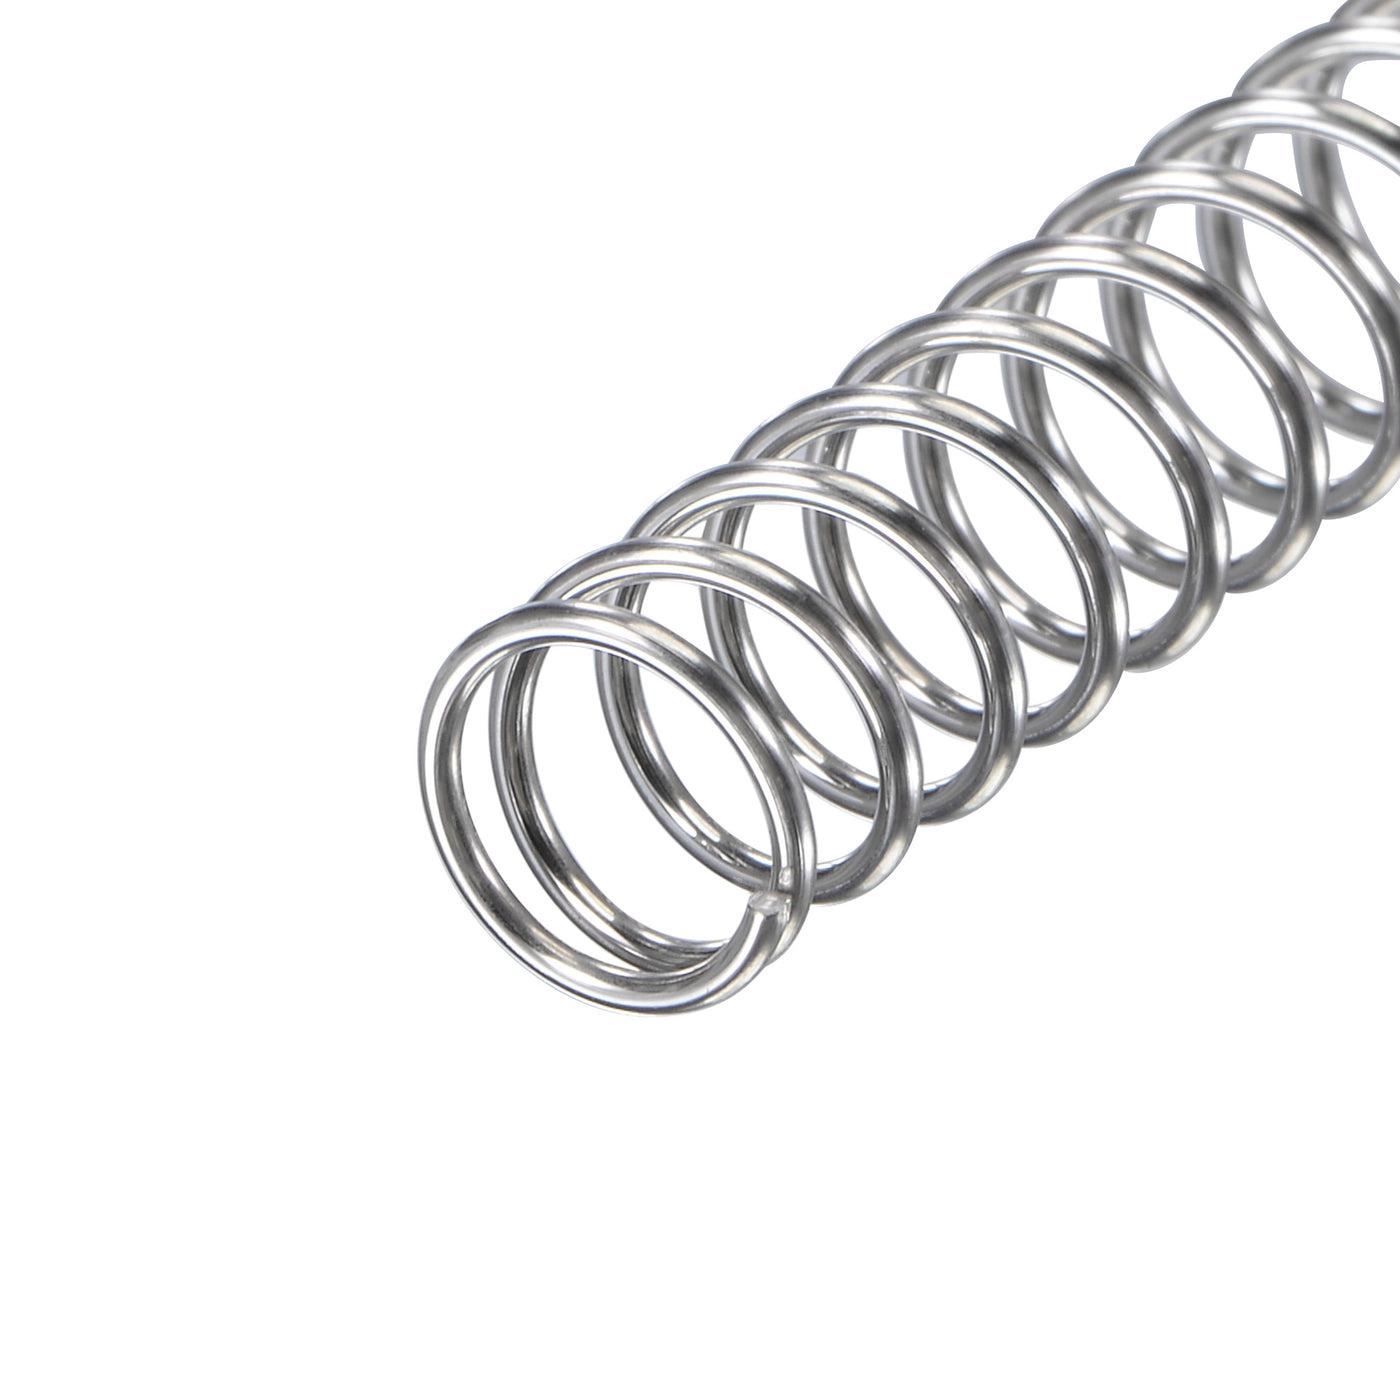 uxcell Uxcell 8mmx0.8mmx40mm 304 Stainless Steel Compression Spring 11.8N Load Capacity 30pcs